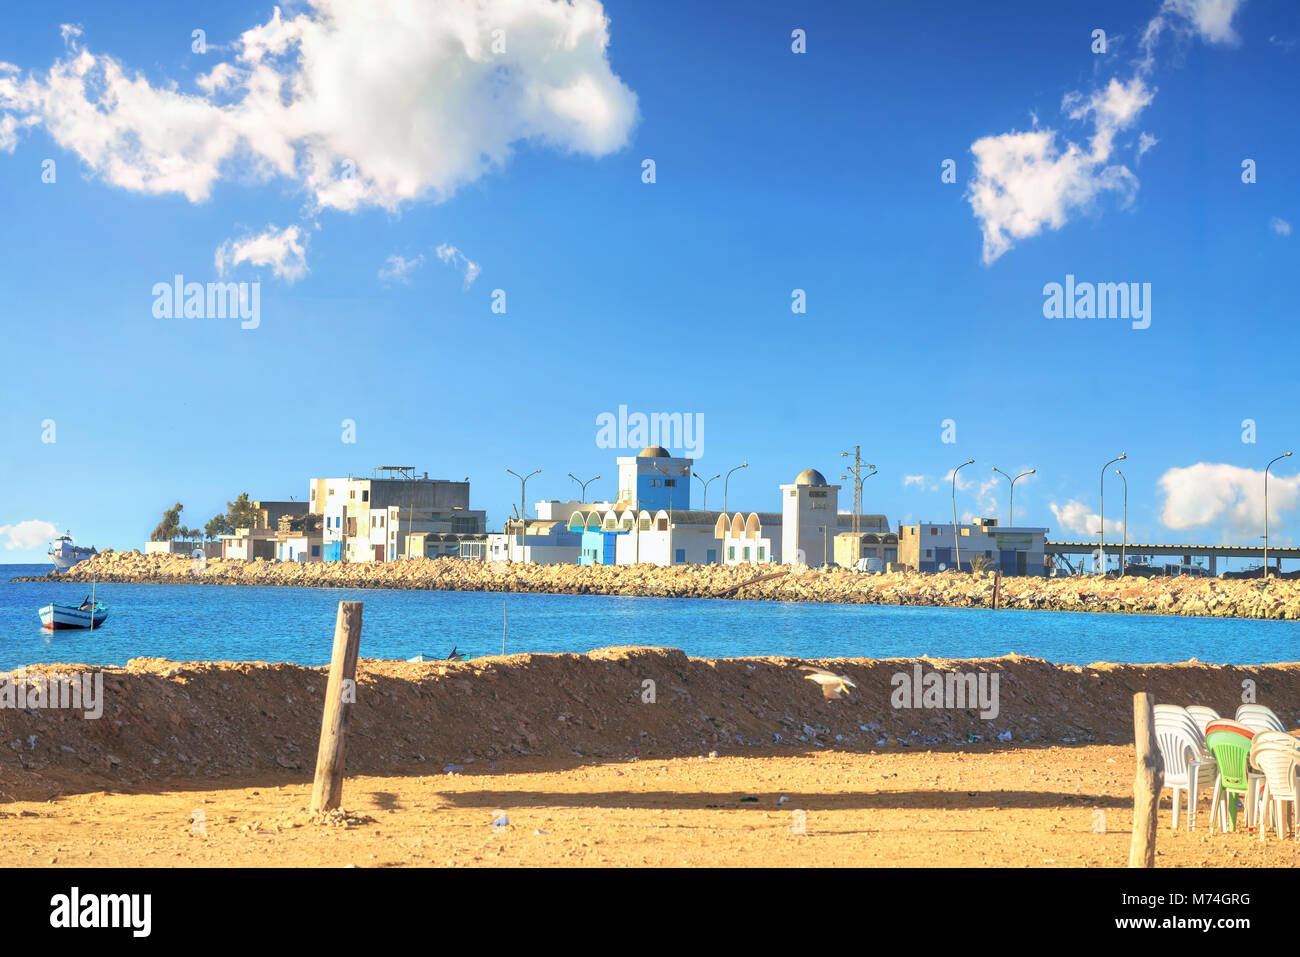 Scenic view of typical fishing village. Tunisia, North Africa Stock Photo